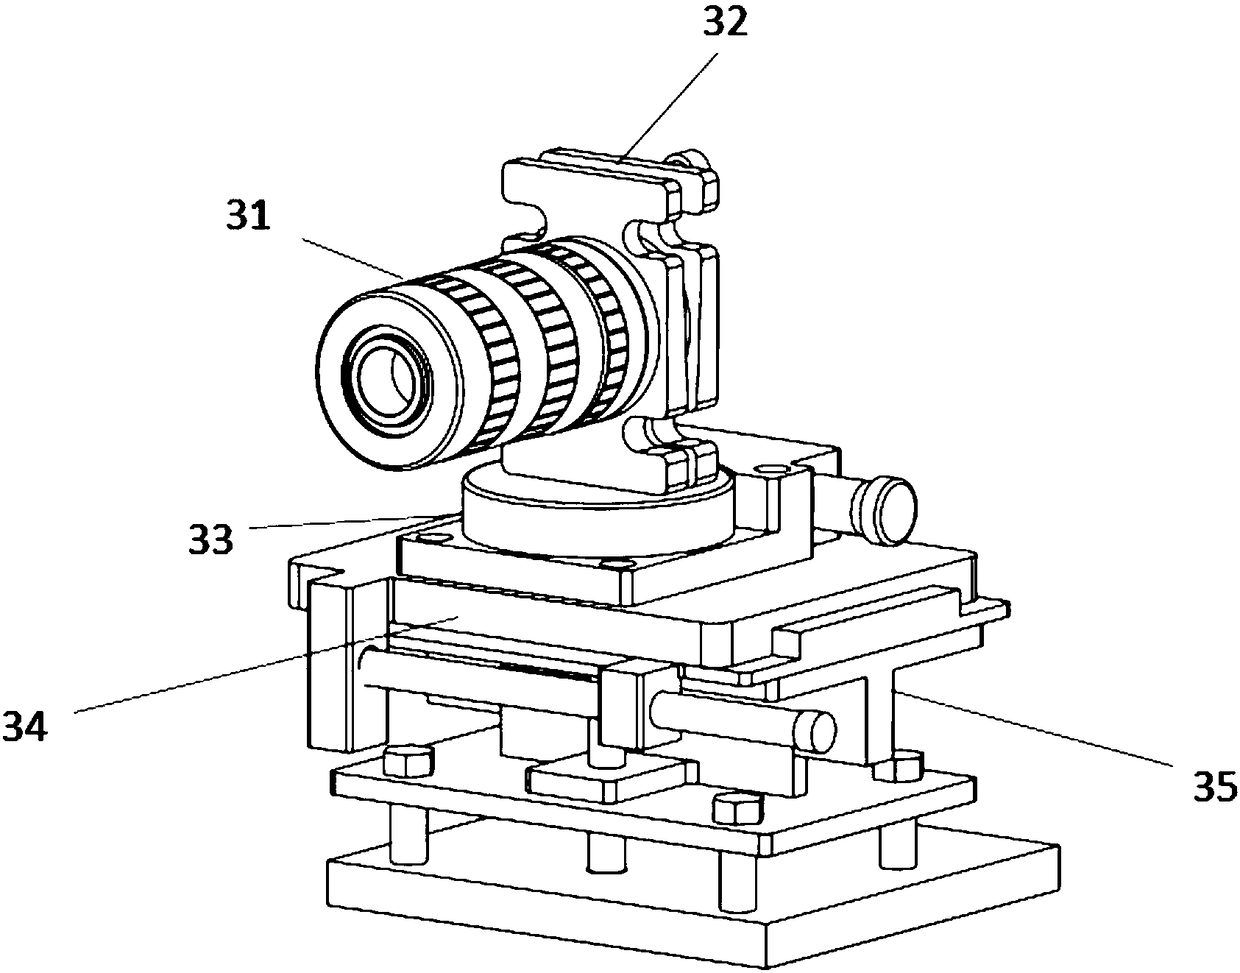 Non-coaxial four-channel polarization imaging method and system